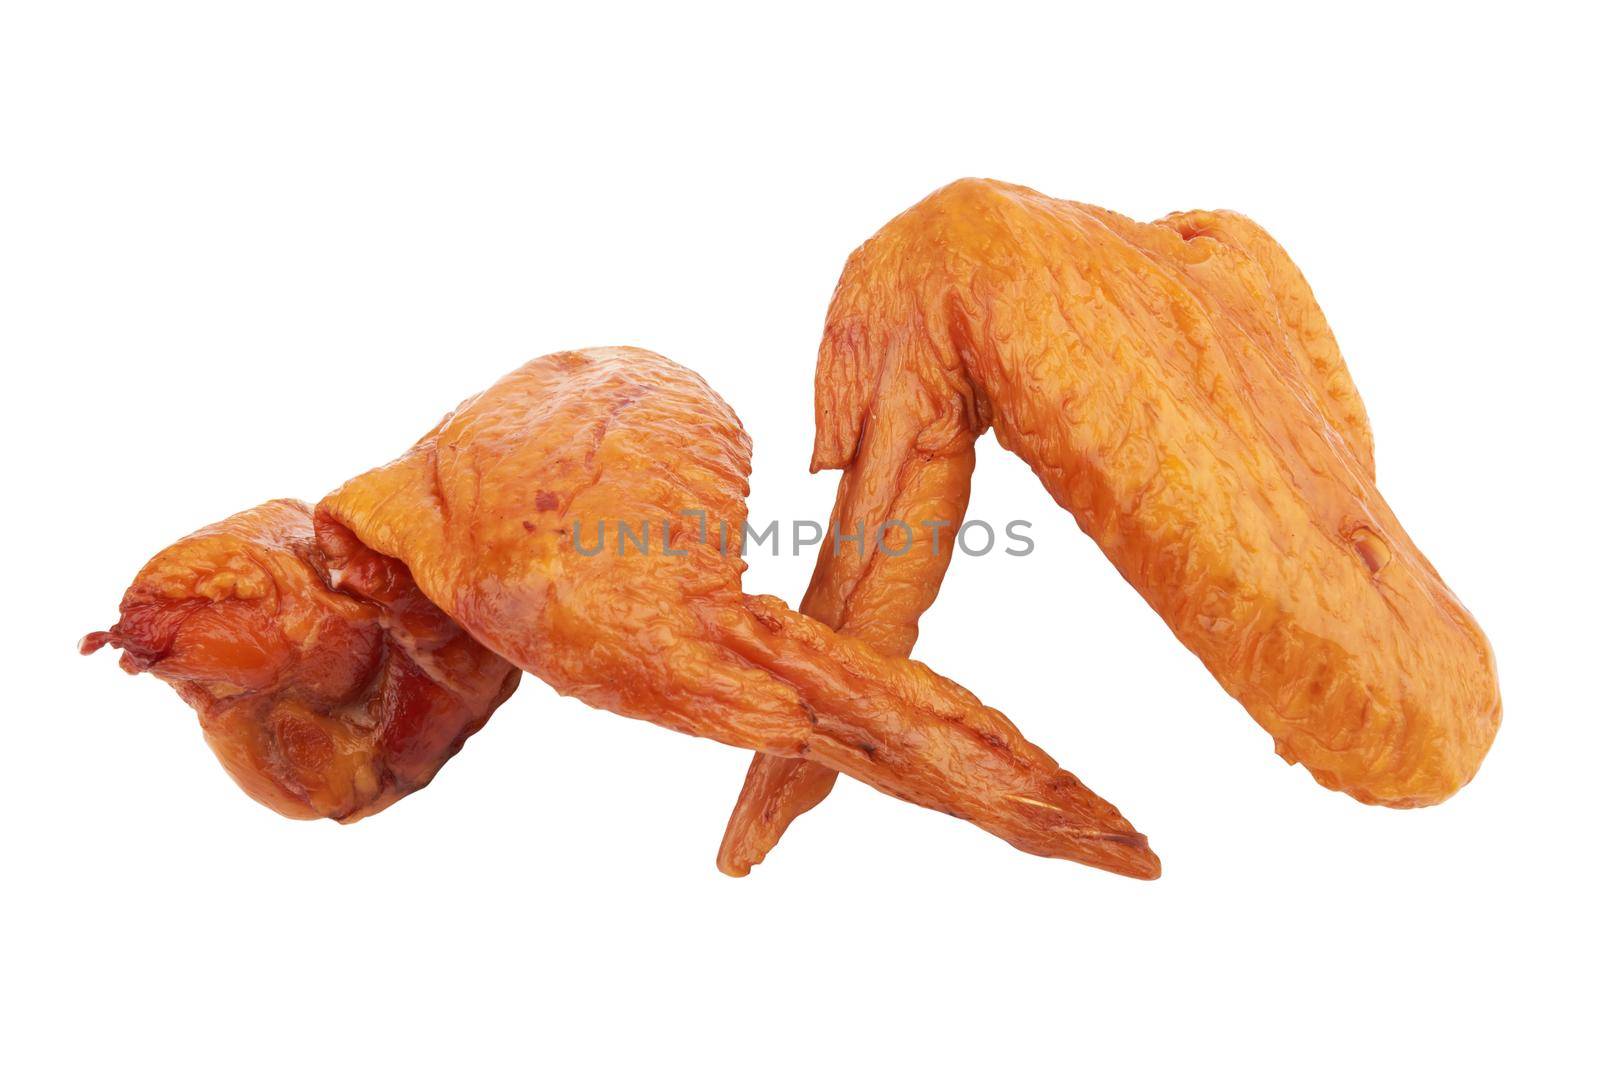 Smoked chicken wings by pioneer111